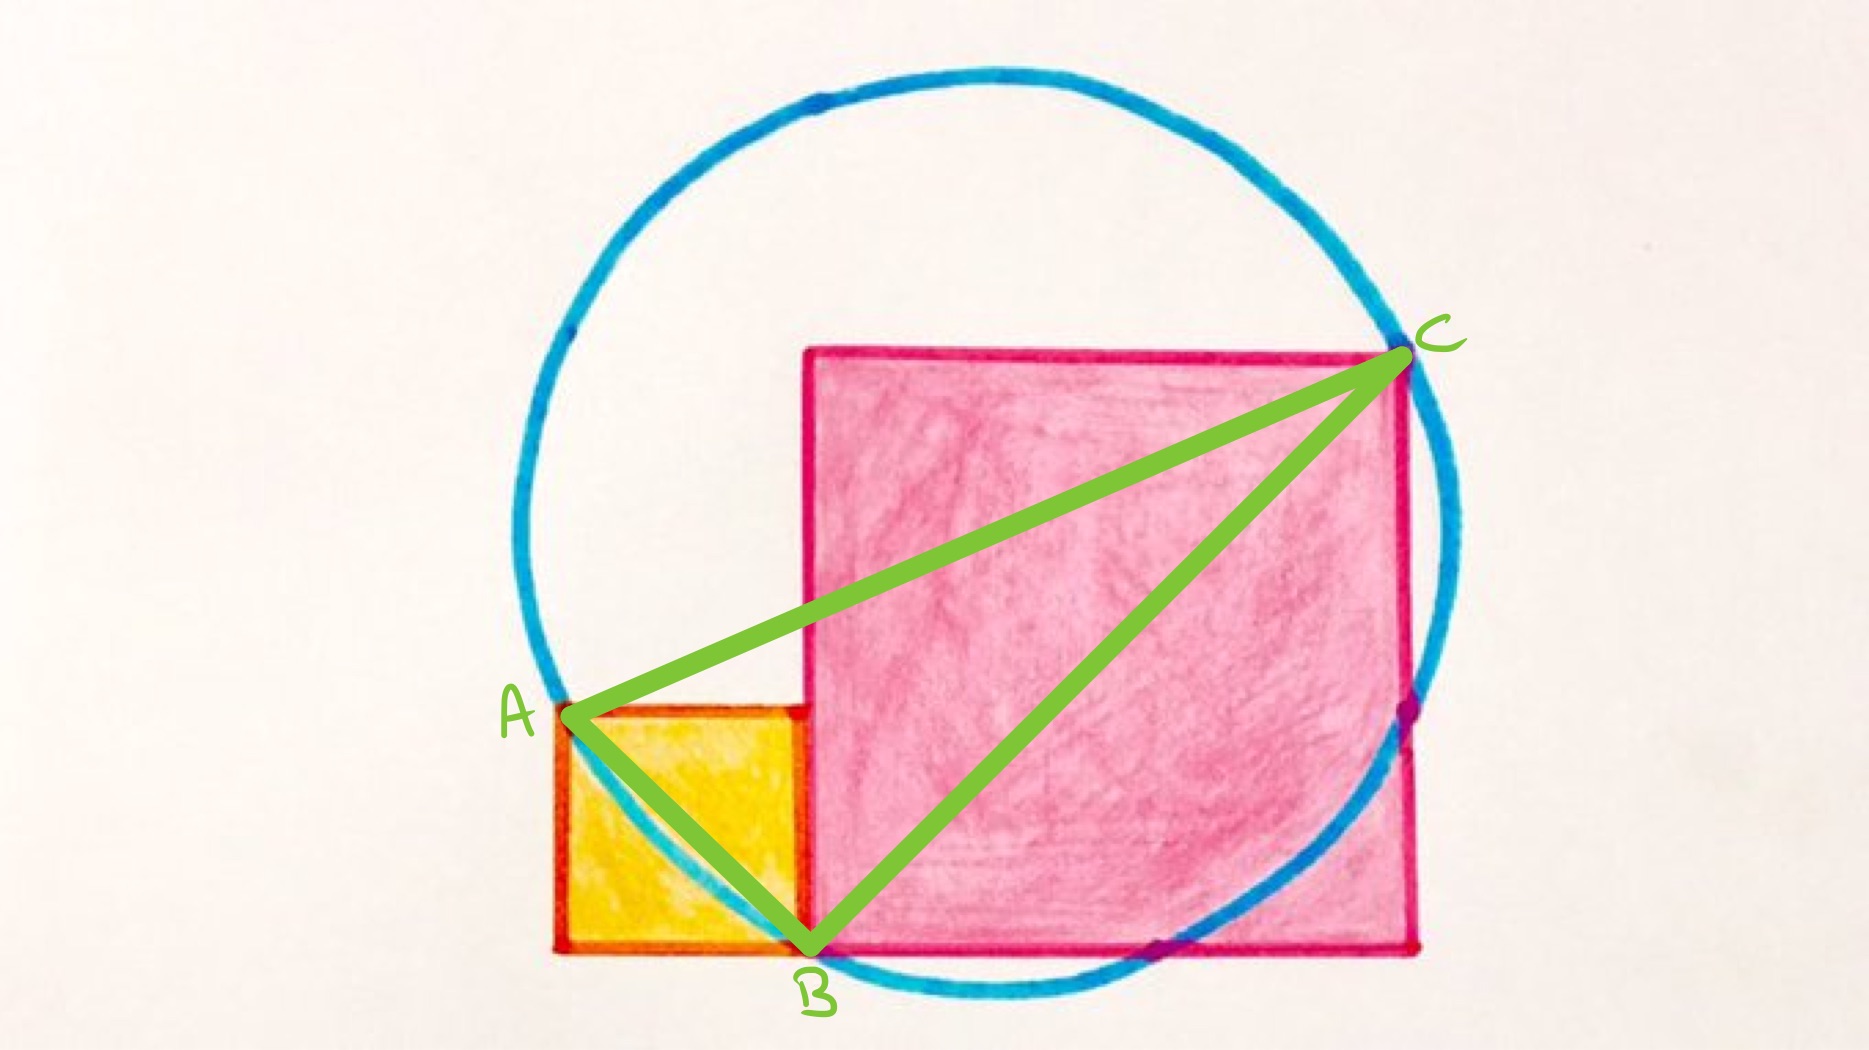 Two squares on a circle labelled